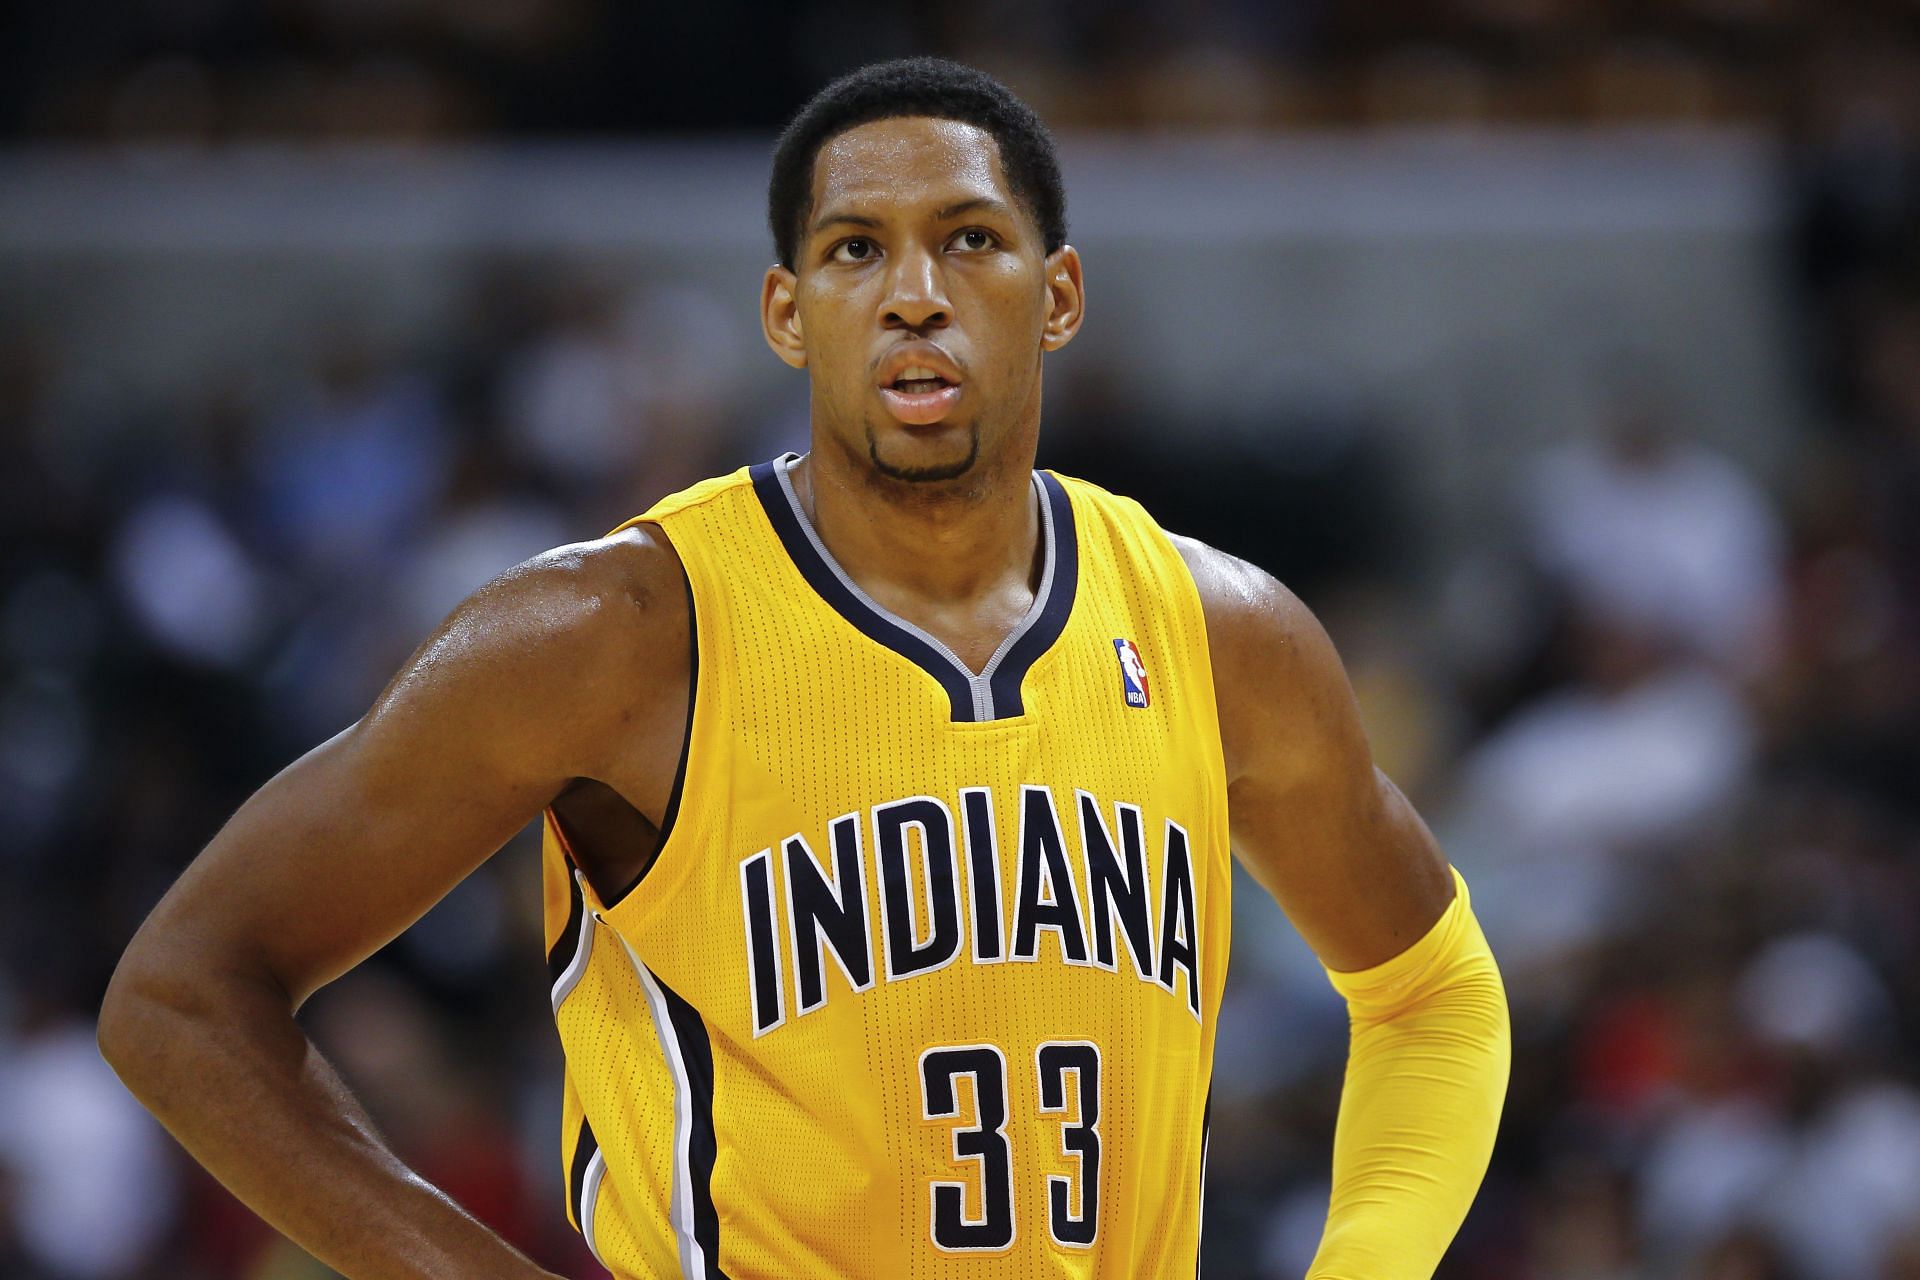 What happened to Danny Granger? Where is he now? Finding out more